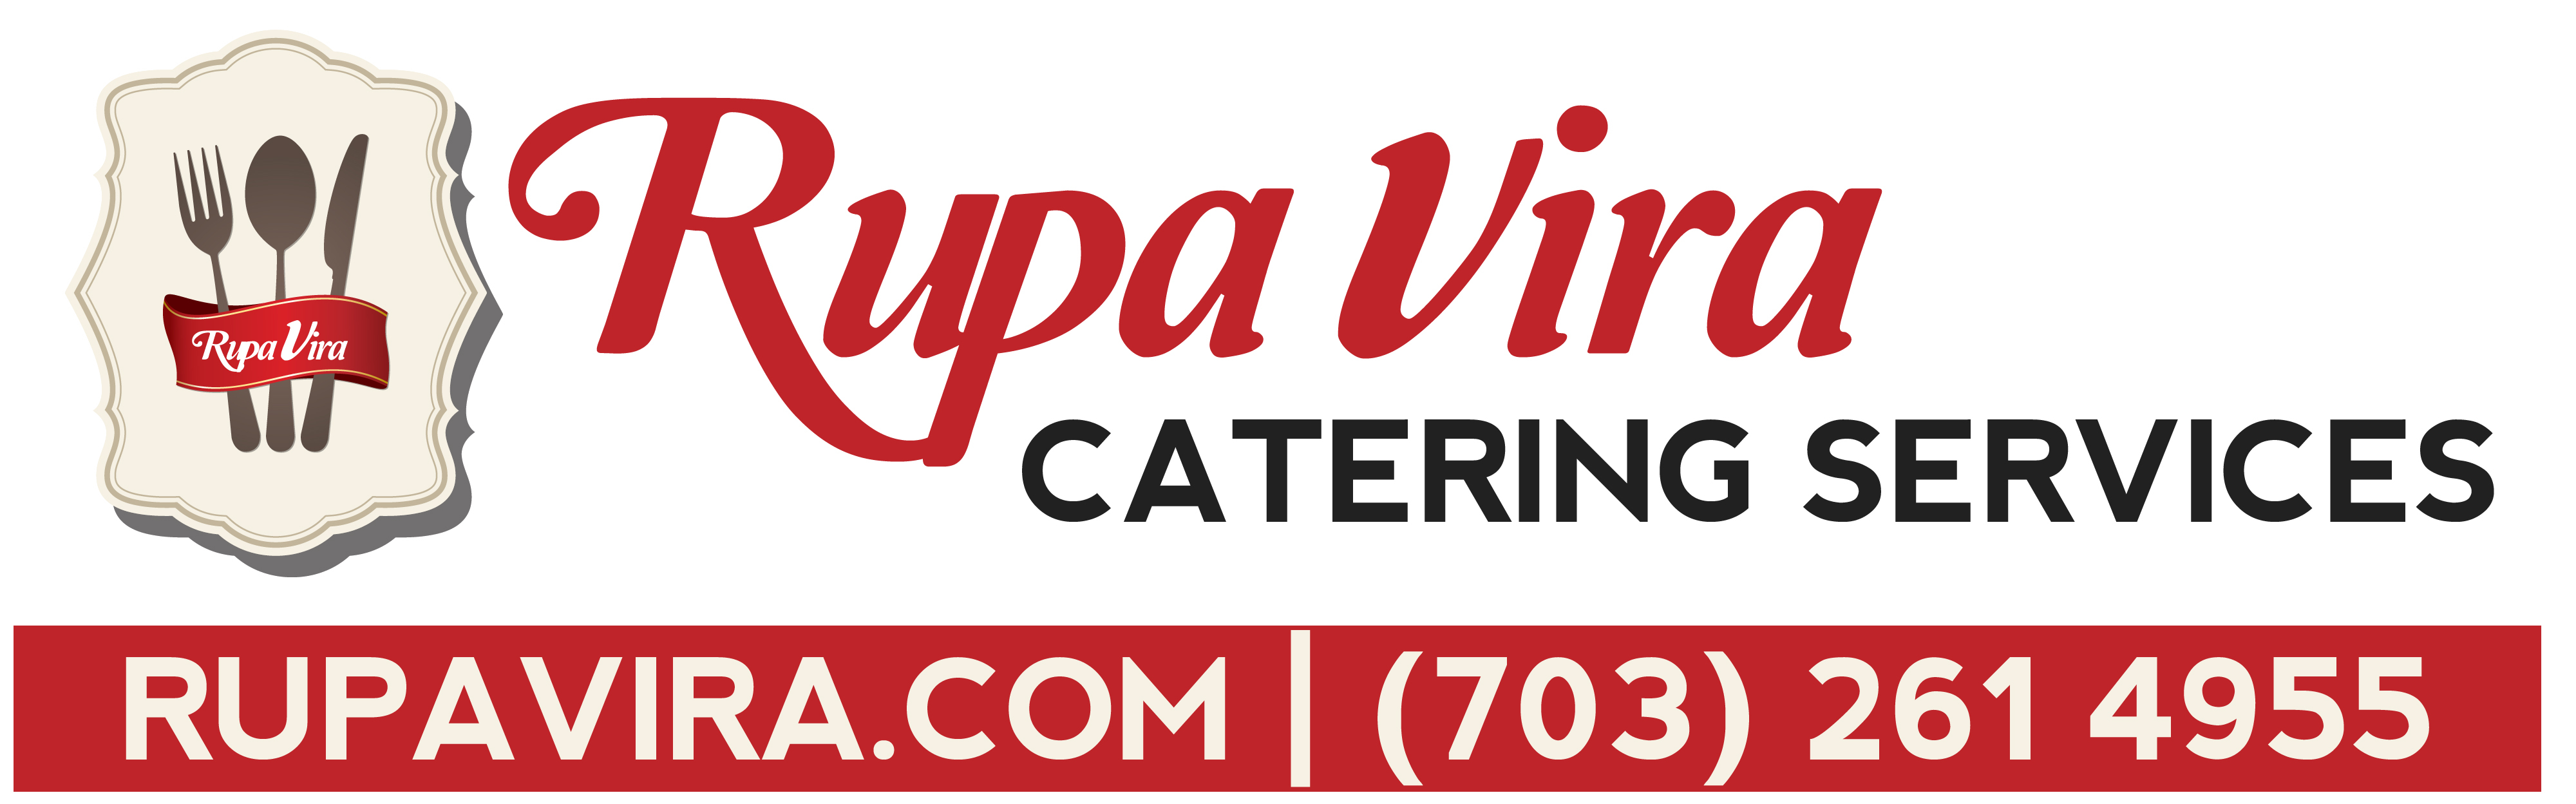 Rupa Vira's Catering Services Logo